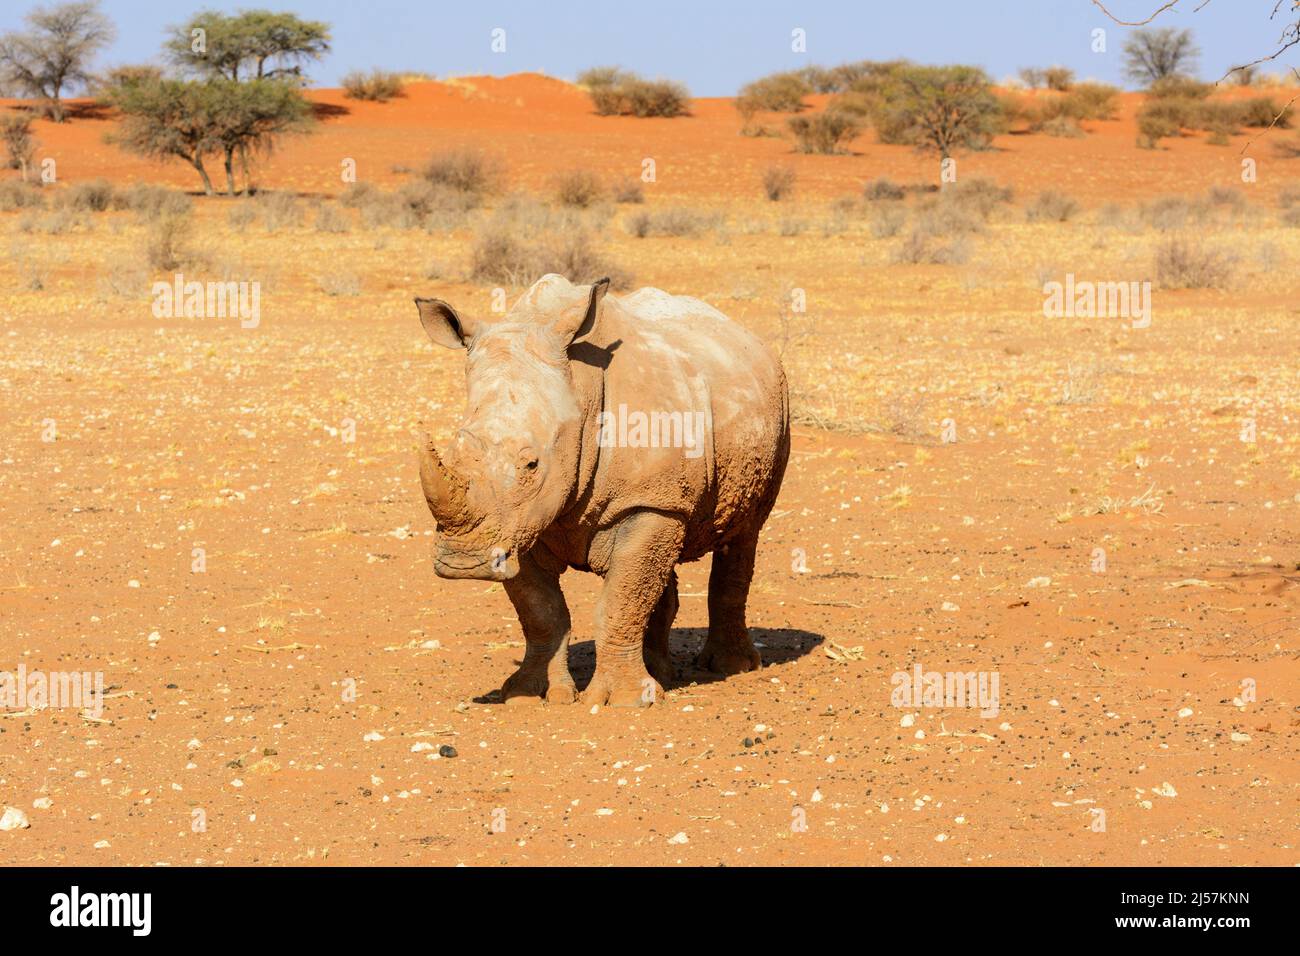 A white rhinoceros (Ceratotherium simum) covered in mud walks across the red sand dunes of the Kalahari Desert, Namibia, Southern Africa Stock Photo